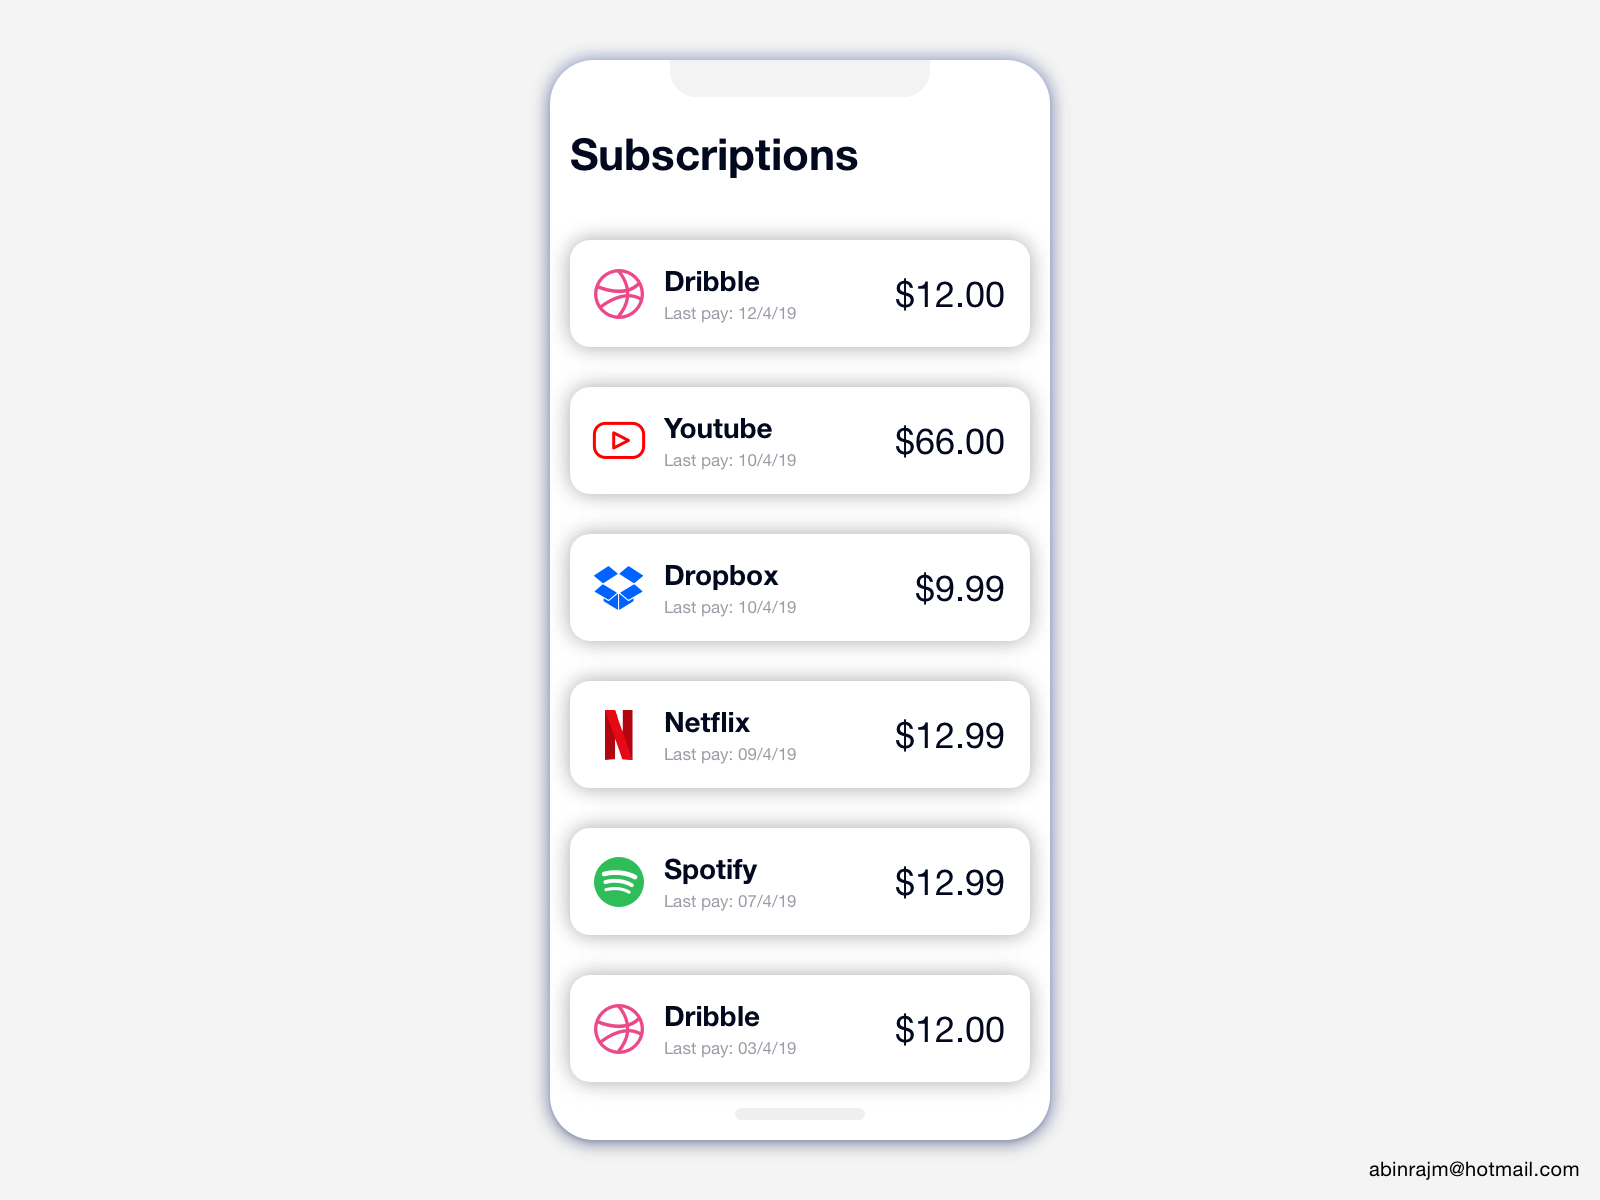 My Subscriptions designed by Abin Raj M ™. Connect with them on Dribbble